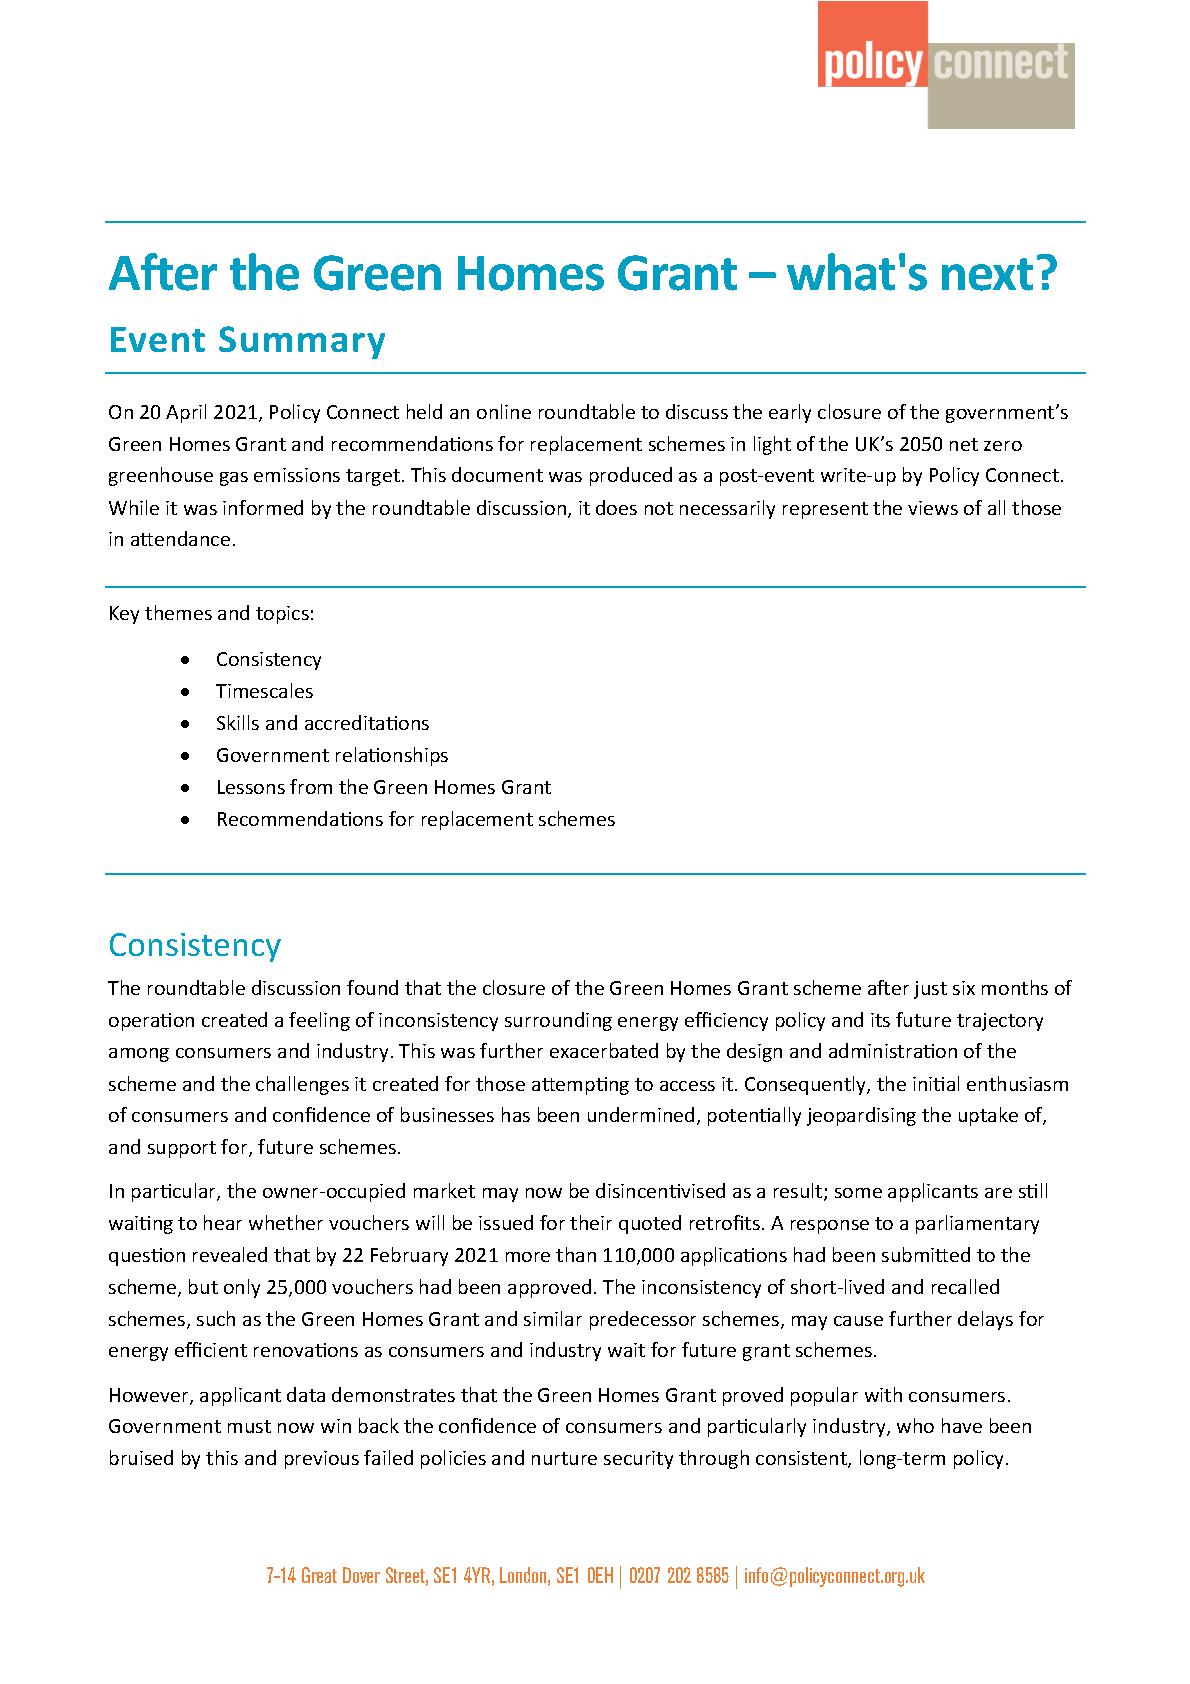 green_homes_grant_write-up